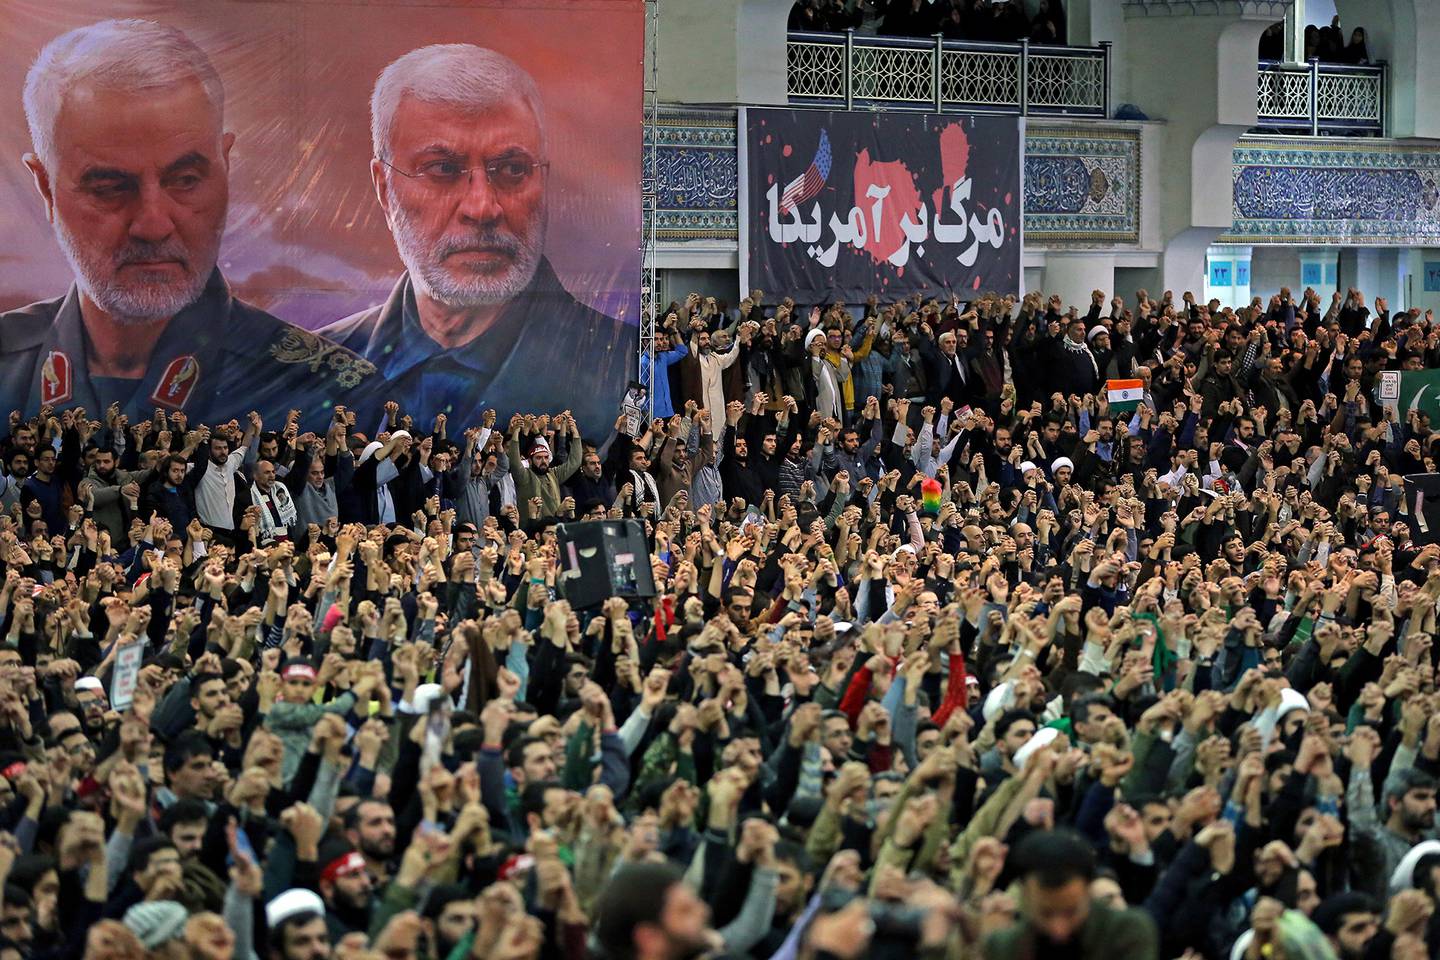 In this Jan. 17, 2020, file photo, released by the official website of the office of the Iranian supreme leader, worshippers chant slogans during Friday prayers ceremony, as a banner show Iranian Revolutionary Guard Gen. Qassem Soleimani, left, and Iraqi Shiite senior militia commander Abu Mahdi al-Muhandis, who were killed in Iraq in a U.S. drone attack on Jan. 3, and a banner which reads in Persian: "Death To America, "at Imam Khomeini Grand Mosque in Tehran, Iran.